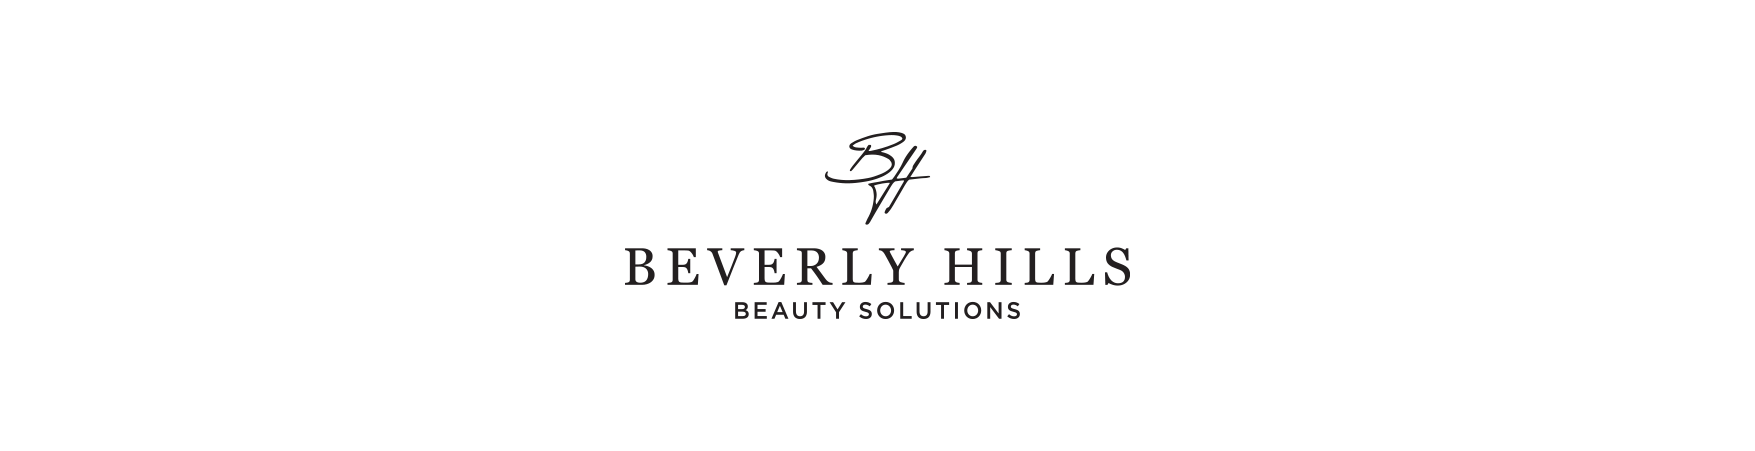 Beverly Hills Beauty Solution